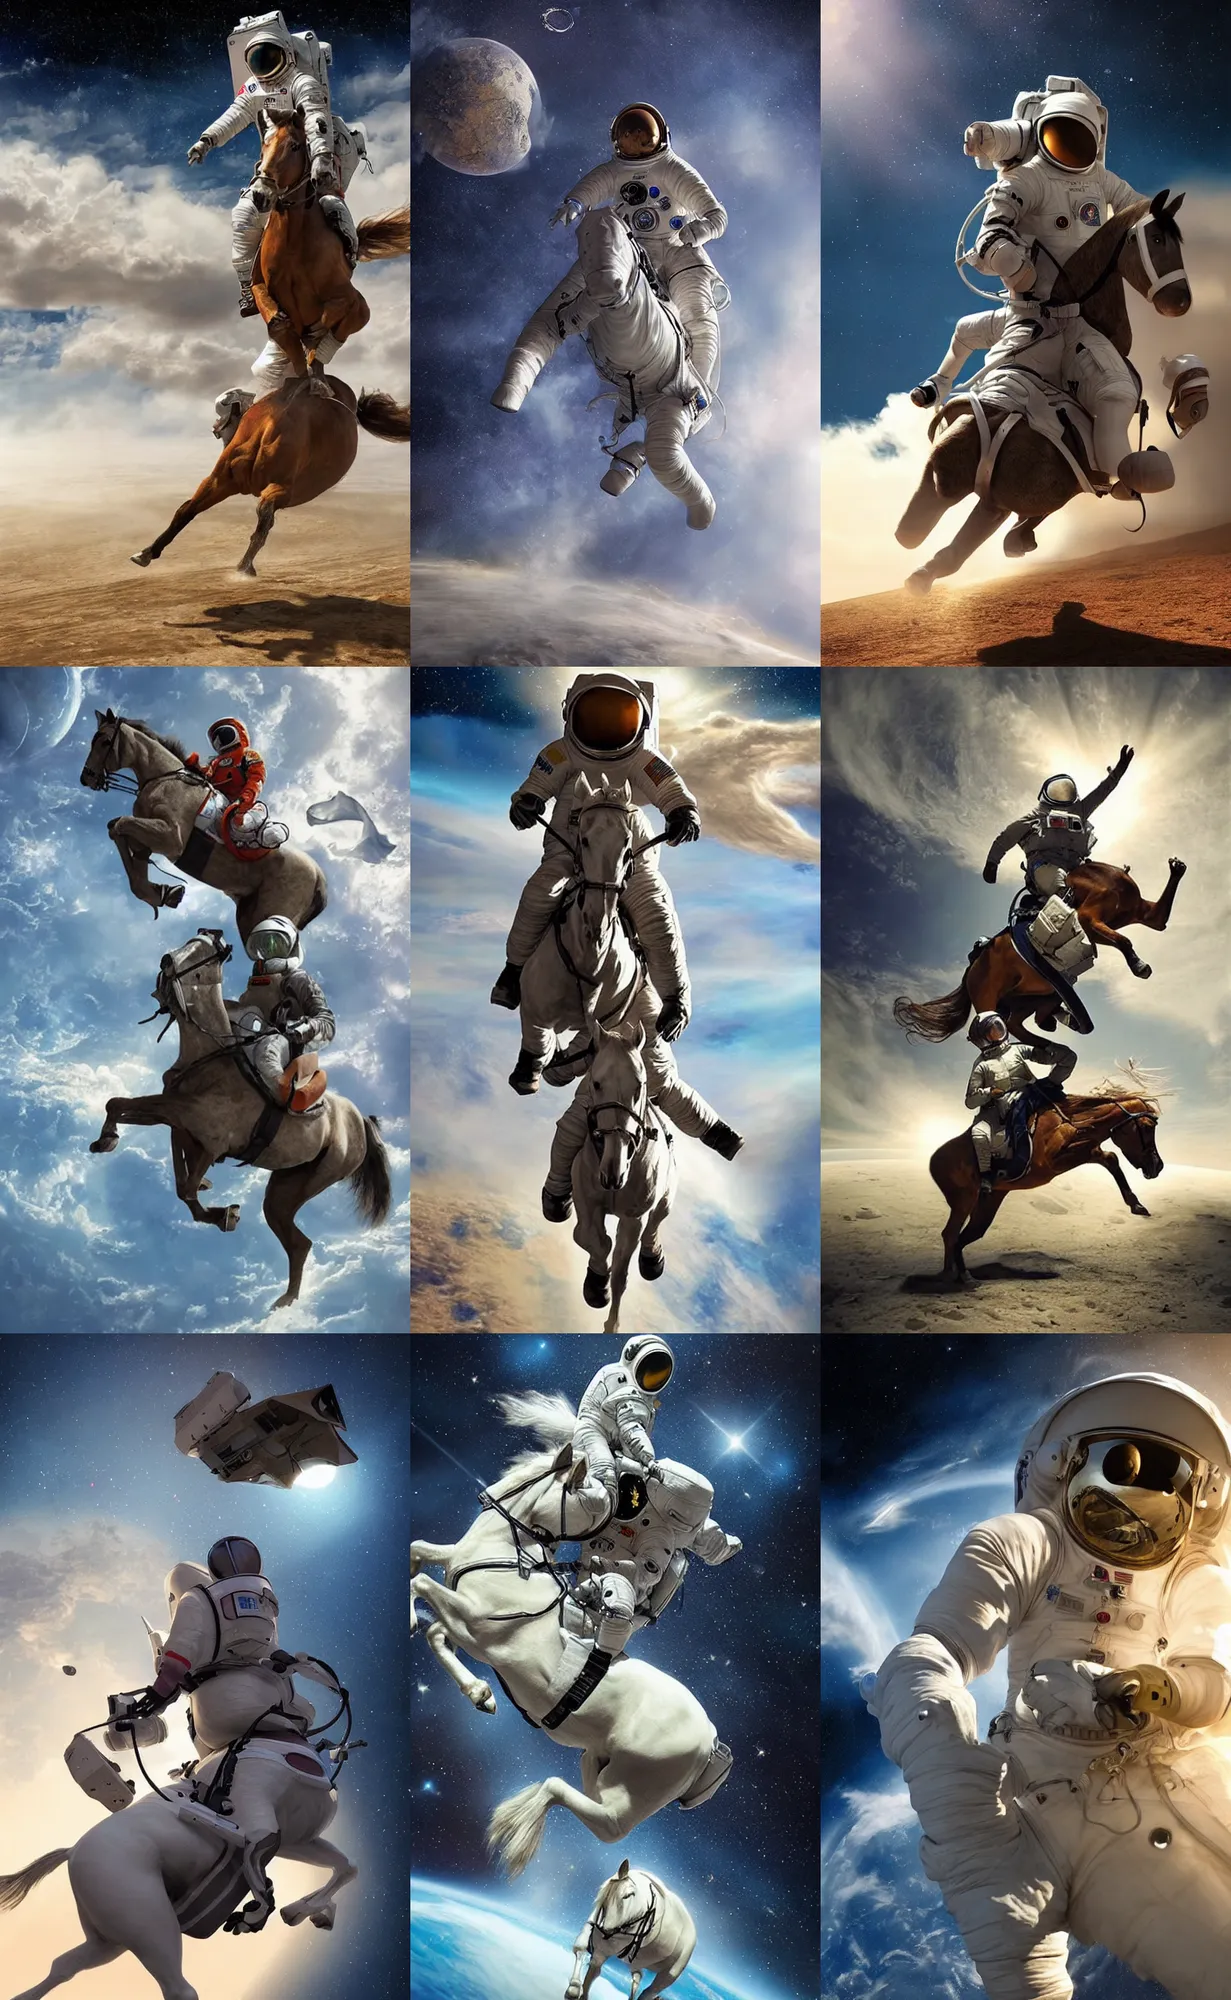 Prompt: photorealistic art of an astronaut riding a horse, dynamic lighting, space atmosphere, hyperrealism, stunning visuals